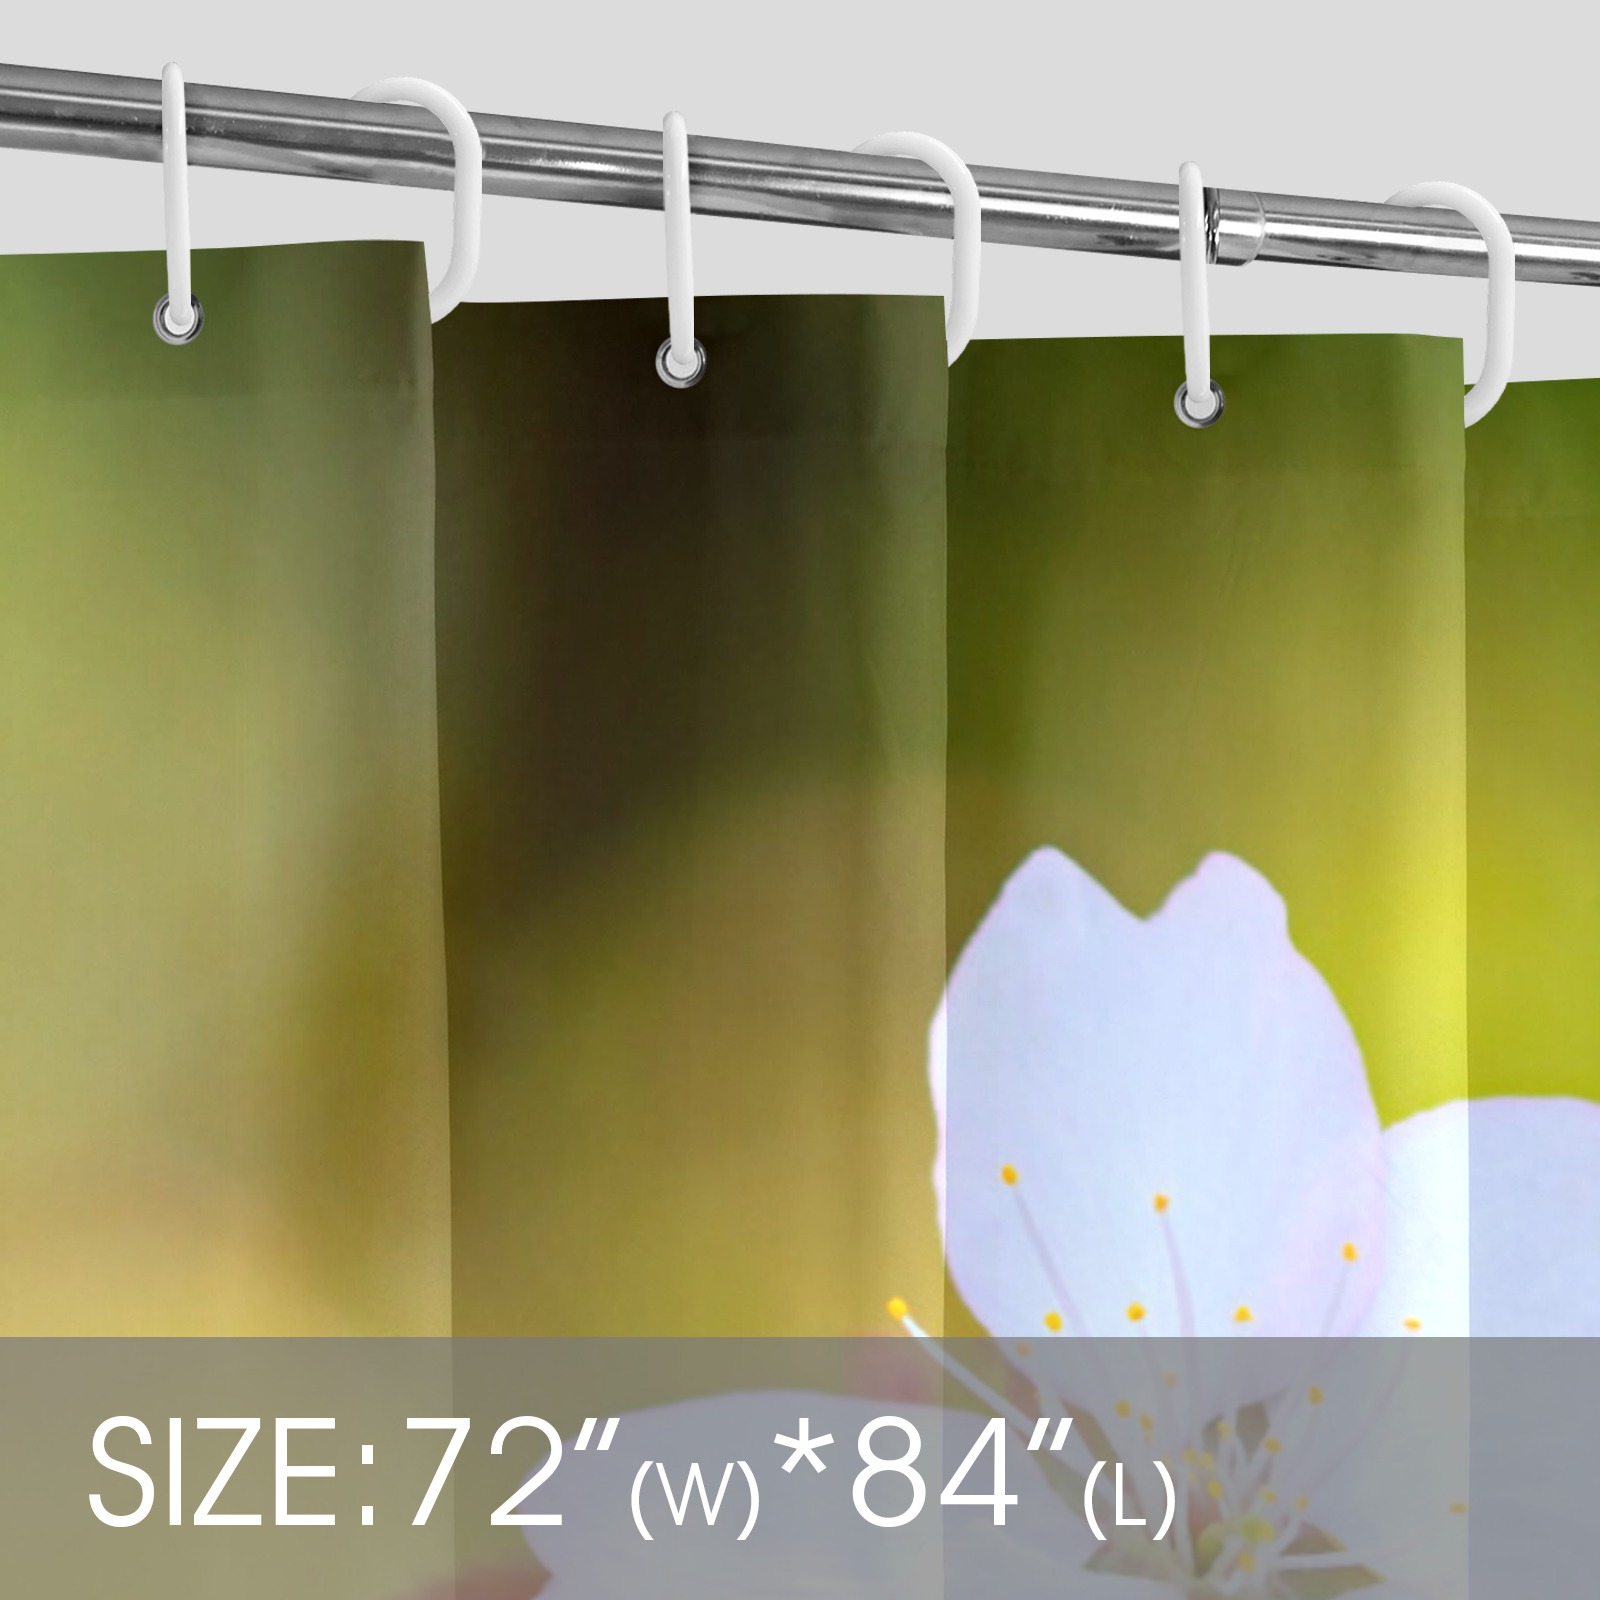 Two sakura cherry flowers, colorful background. Shower Curtain 72"x84"